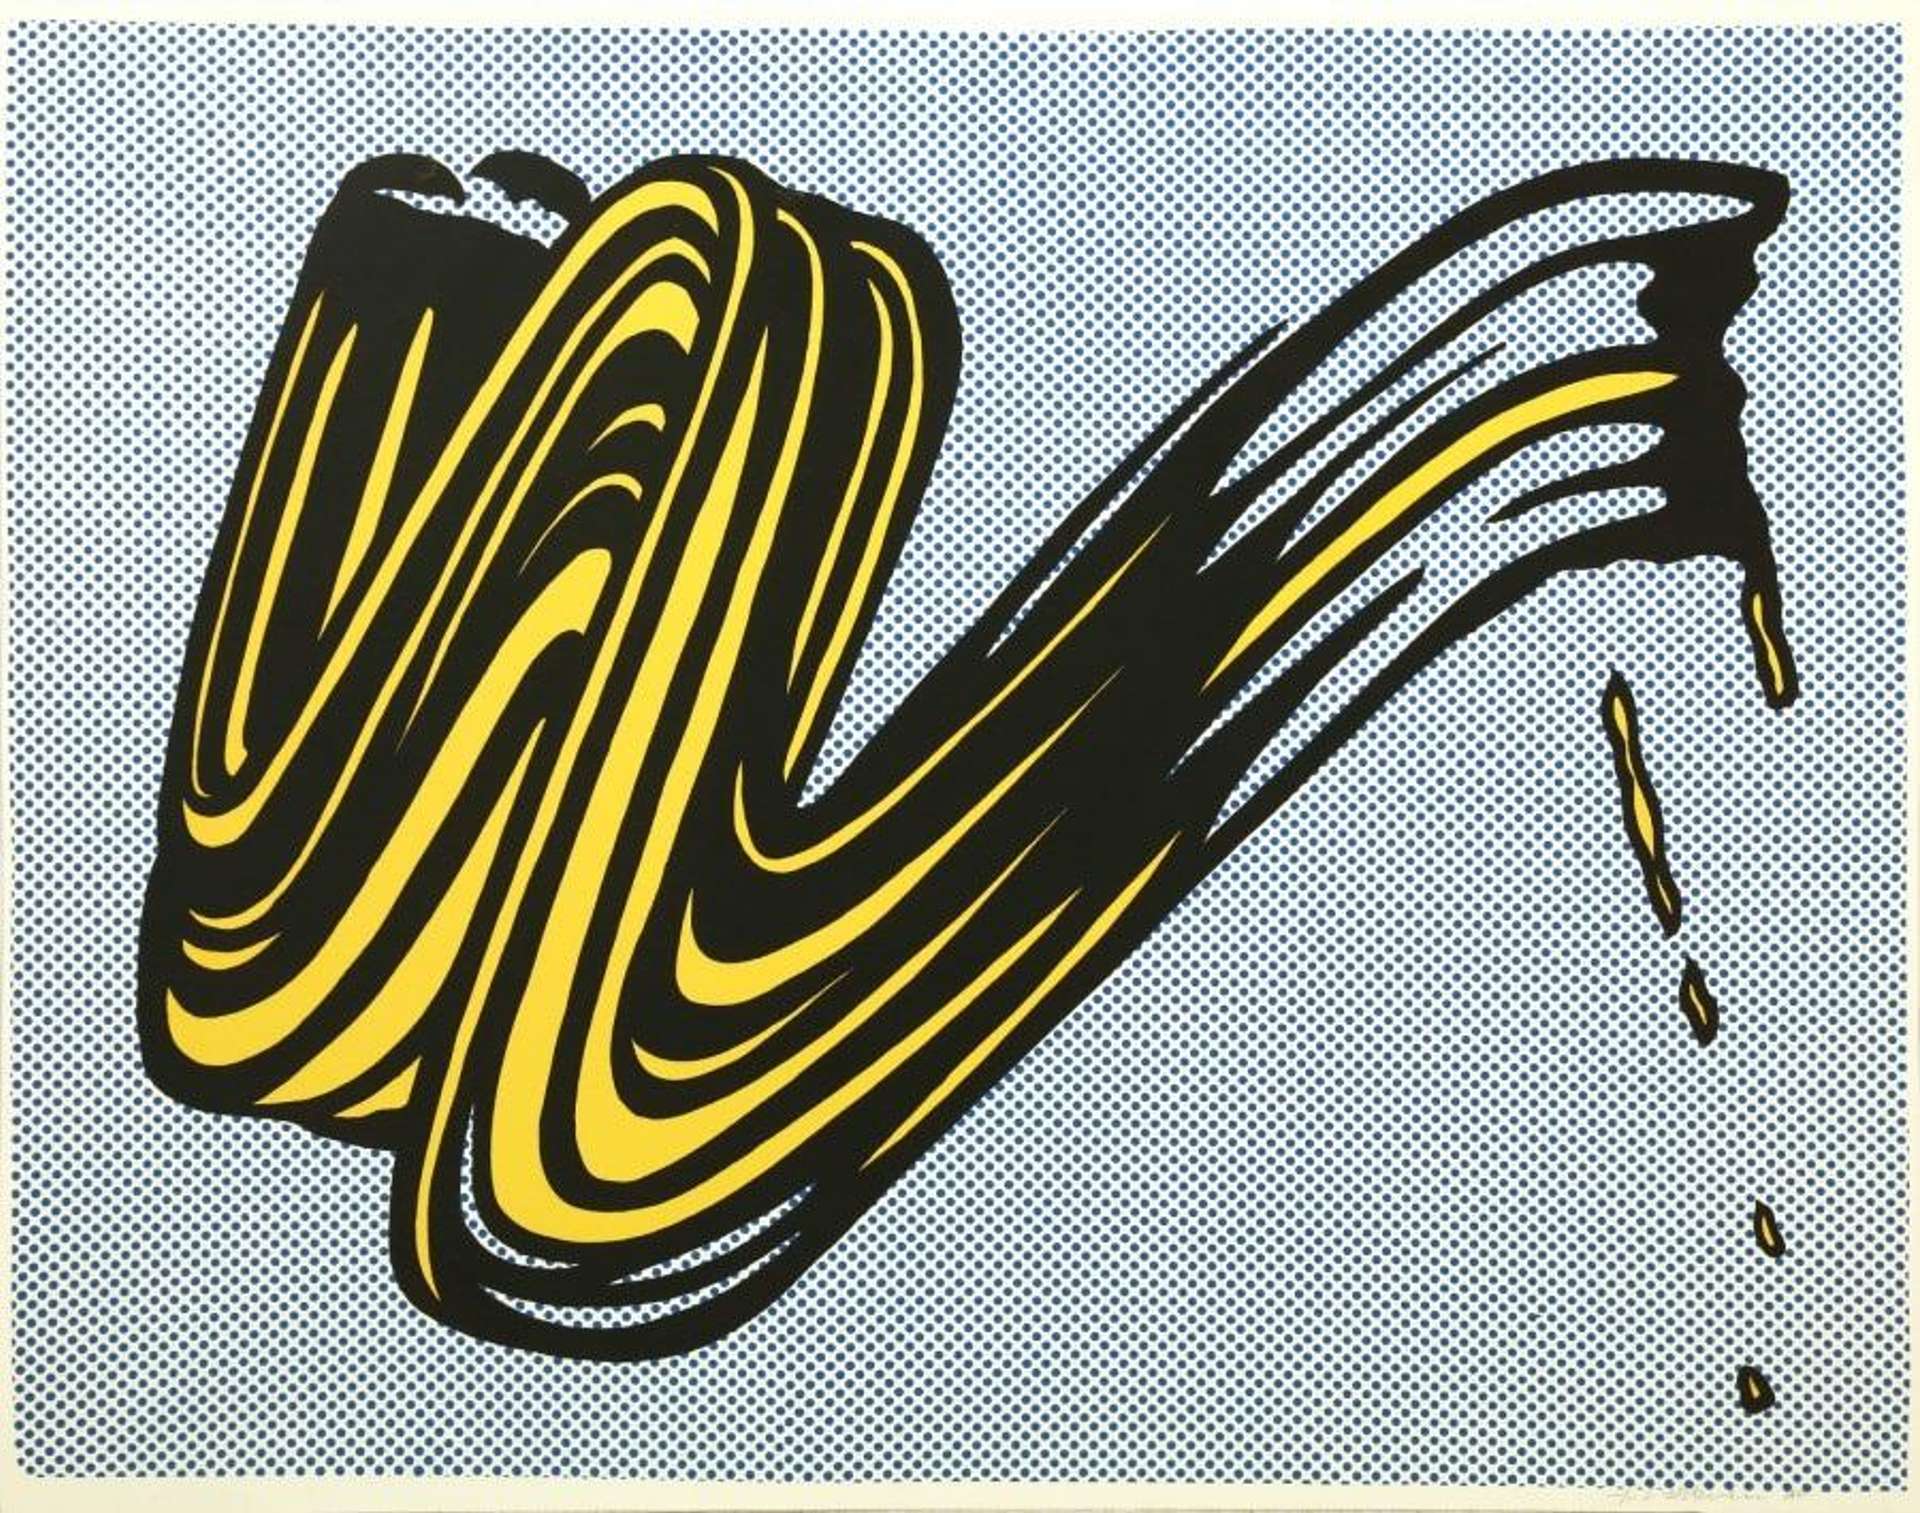 From Dot Painting To Typography: The Techniques Of Roy Lichtenstein